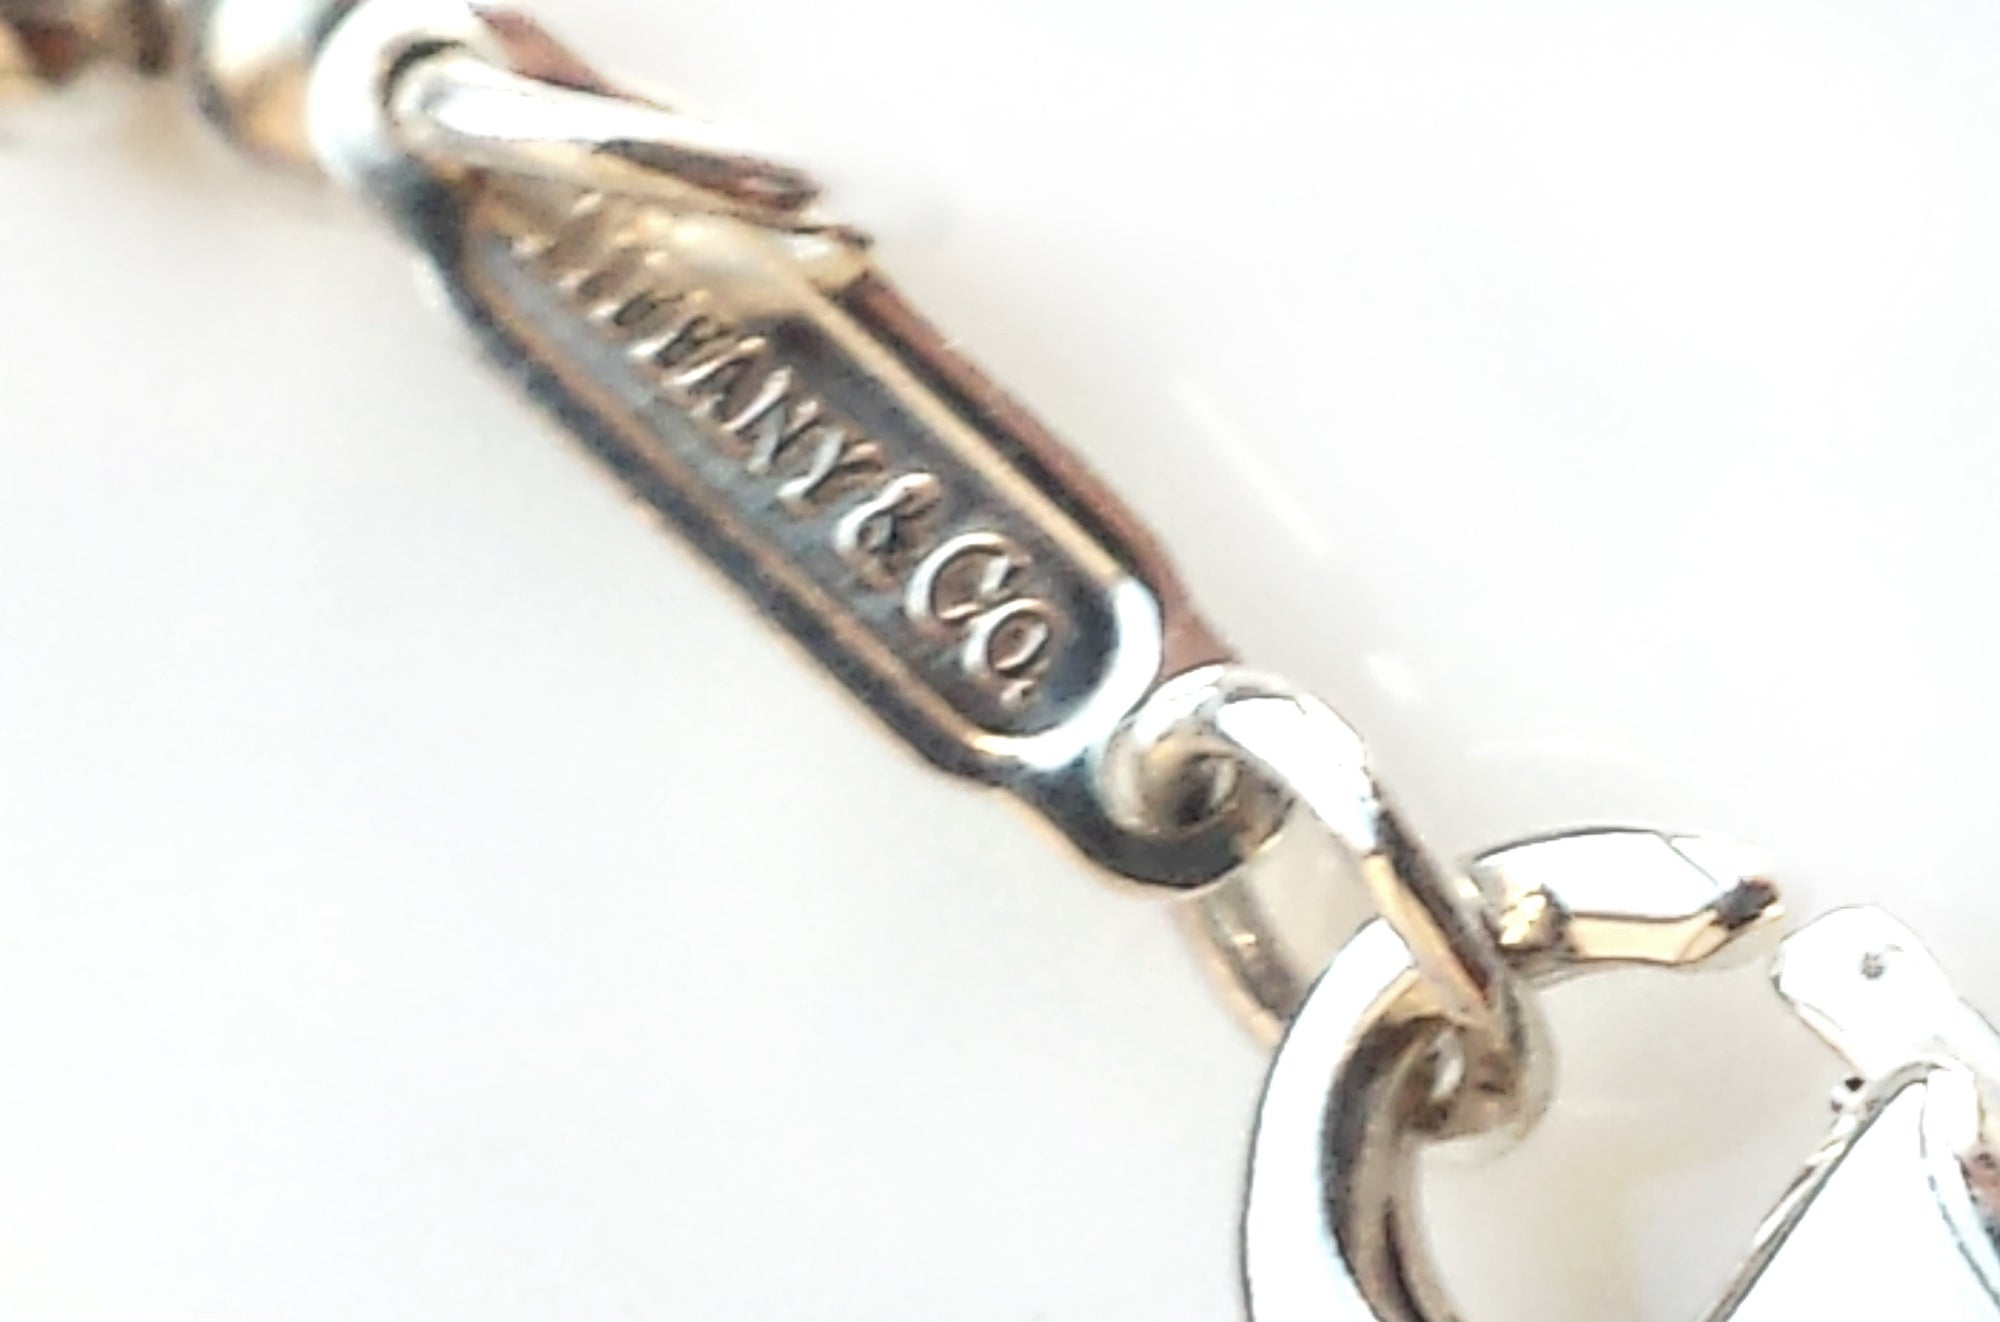 Tiffany & Co. Silver Atlas 'Dog Tag' Necklace on Bead Link Chain